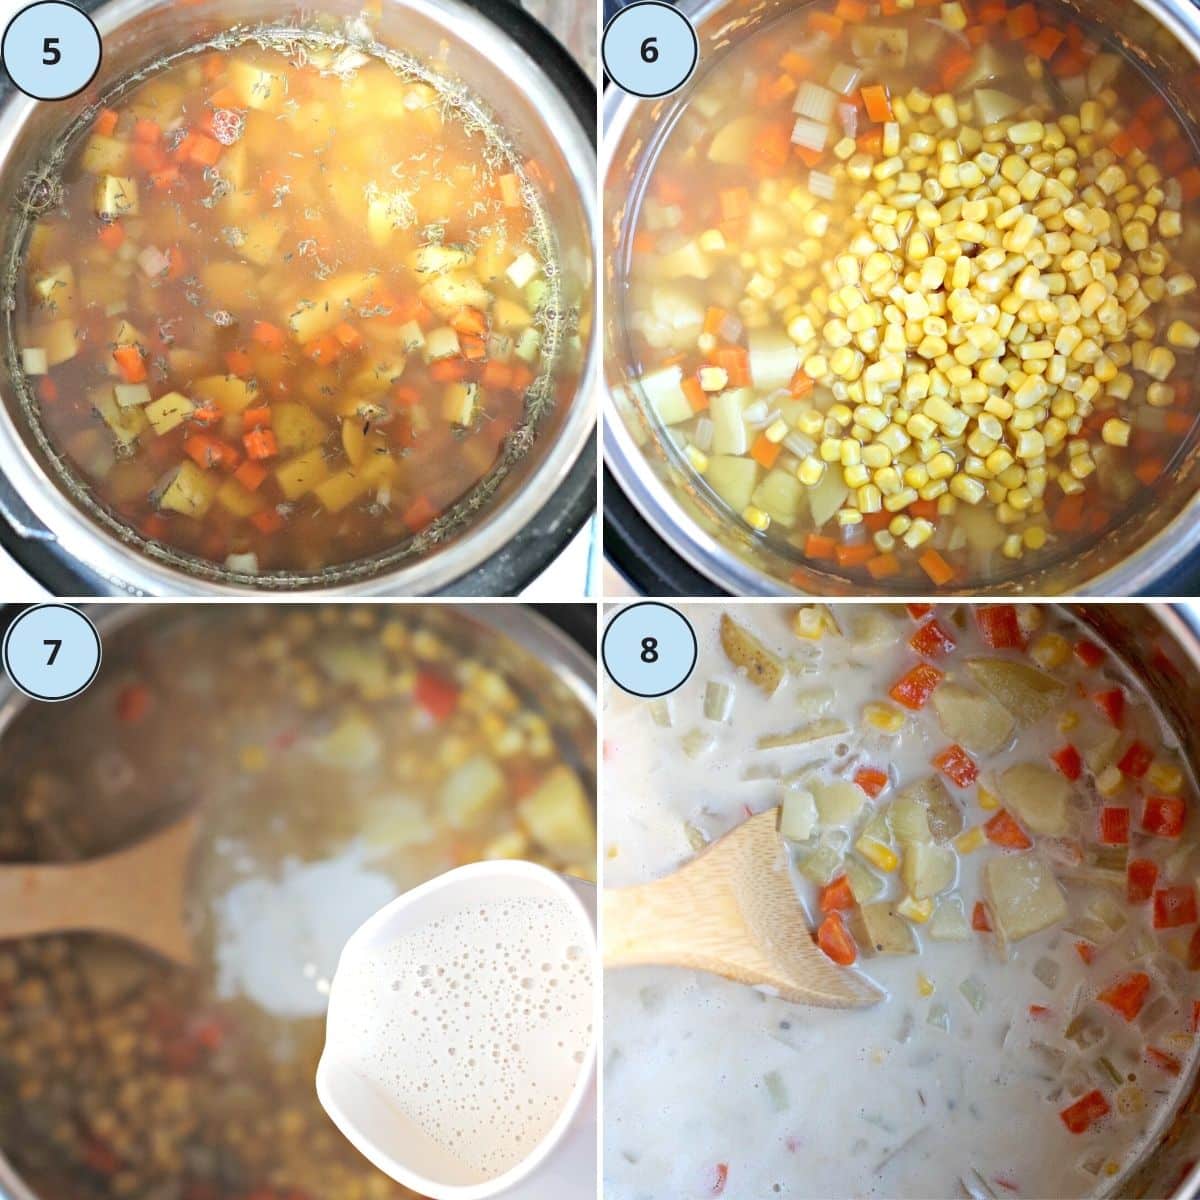 Collage of images showing steps 5 through 8 for making this recipe.